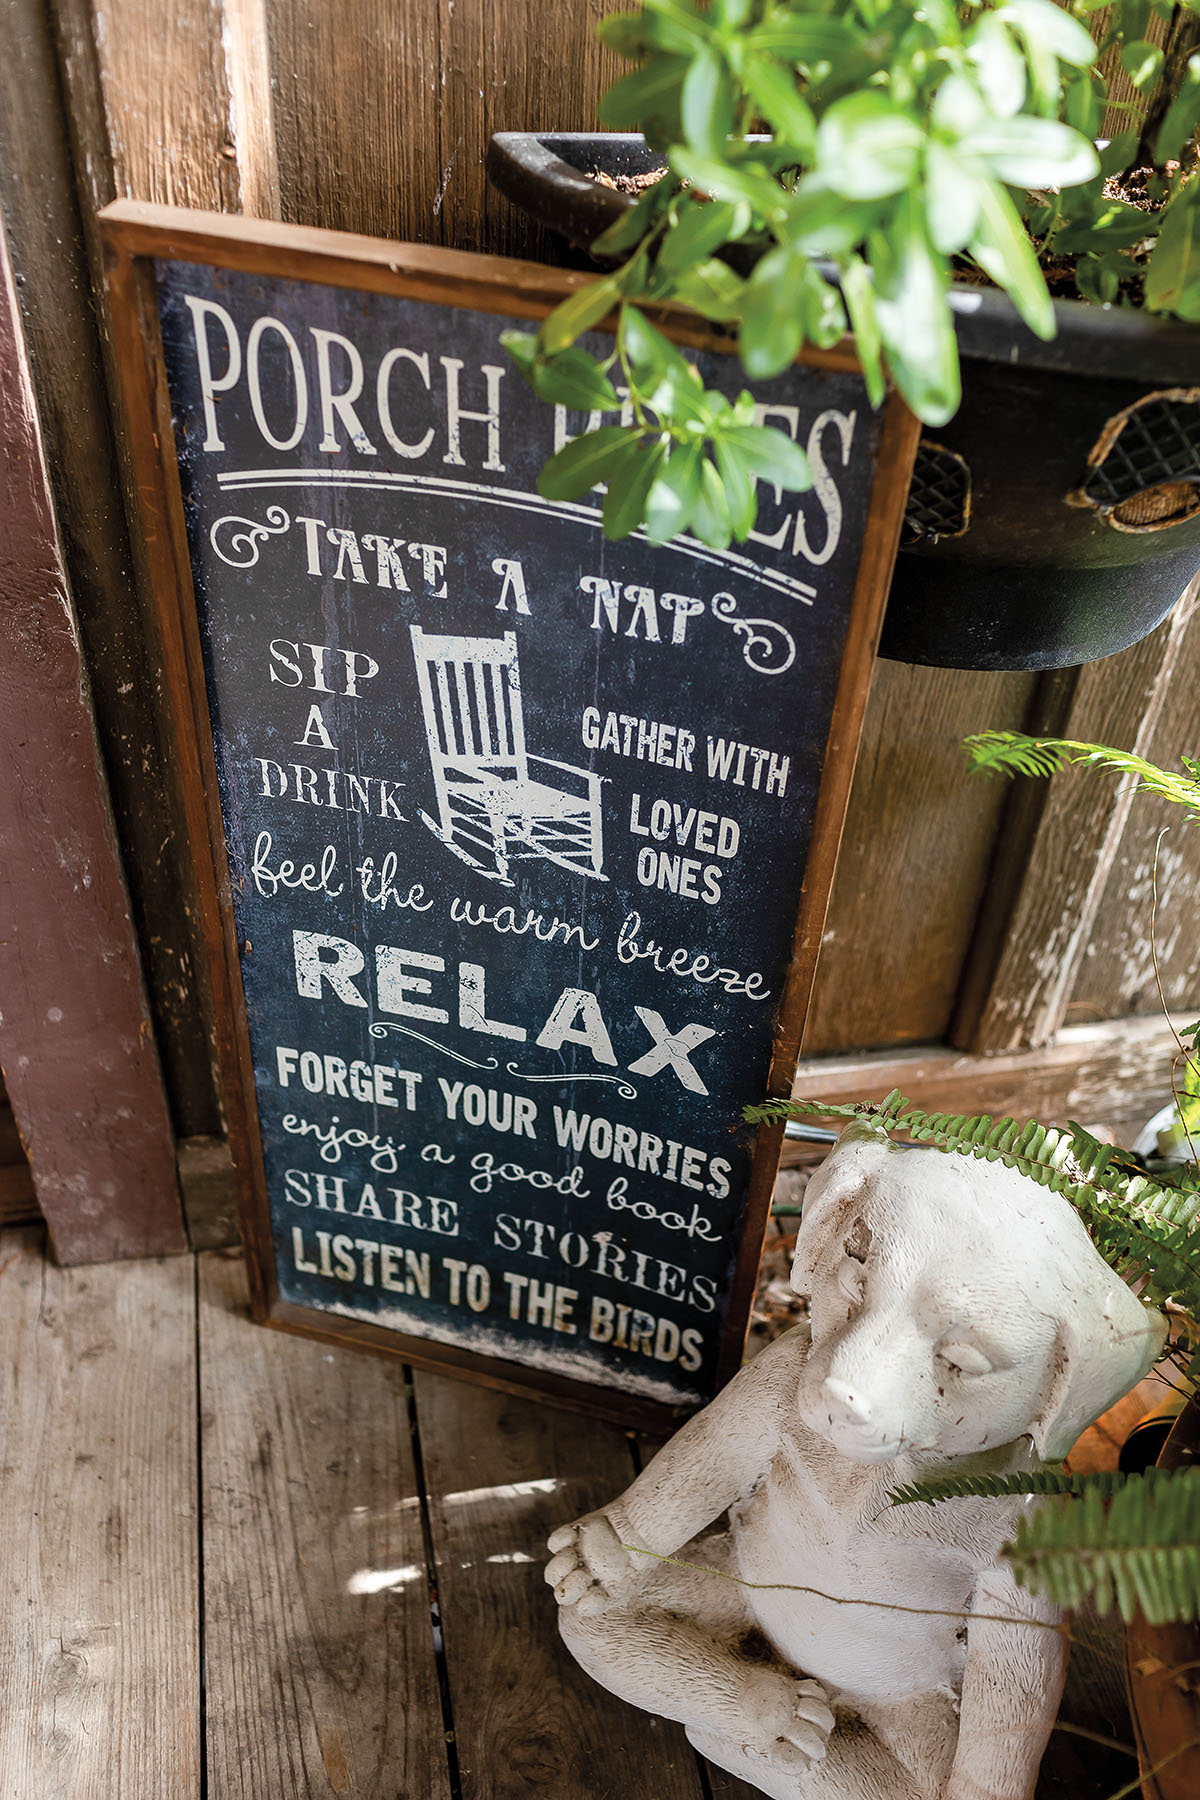 A chalk sign reading relaxing statements like "Take a nap, sip a drink, gather with loved ones, feel the warm breeze, relax, forget your worries, enjoy a good book, share stories, listen to the birds"